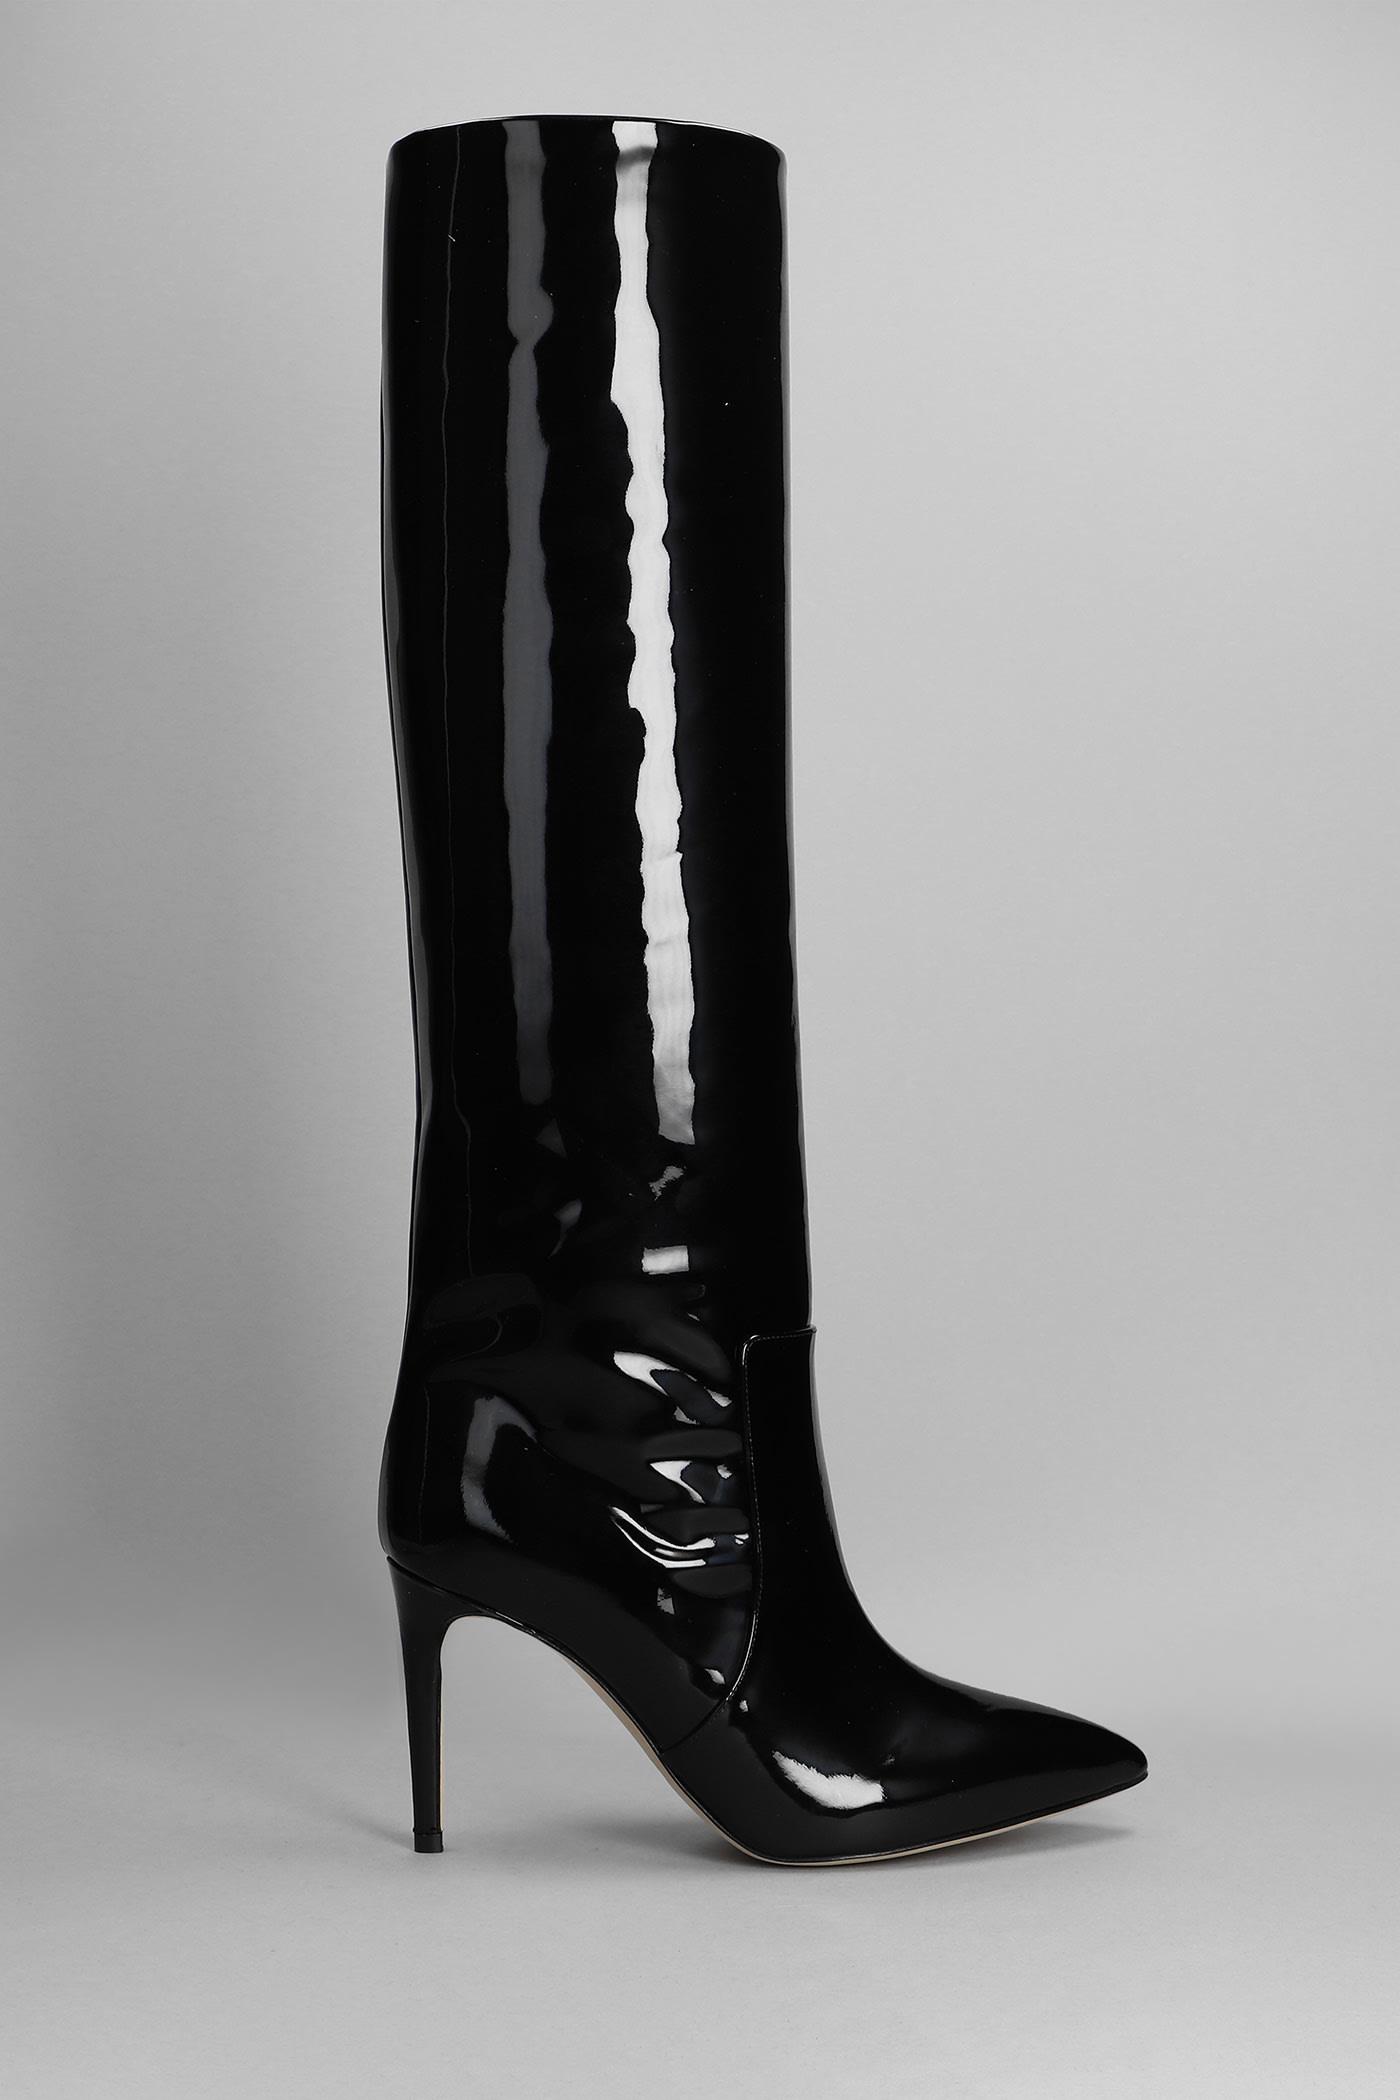 Paris Texas High Heels Boots In Black Patent Leather | Lyst